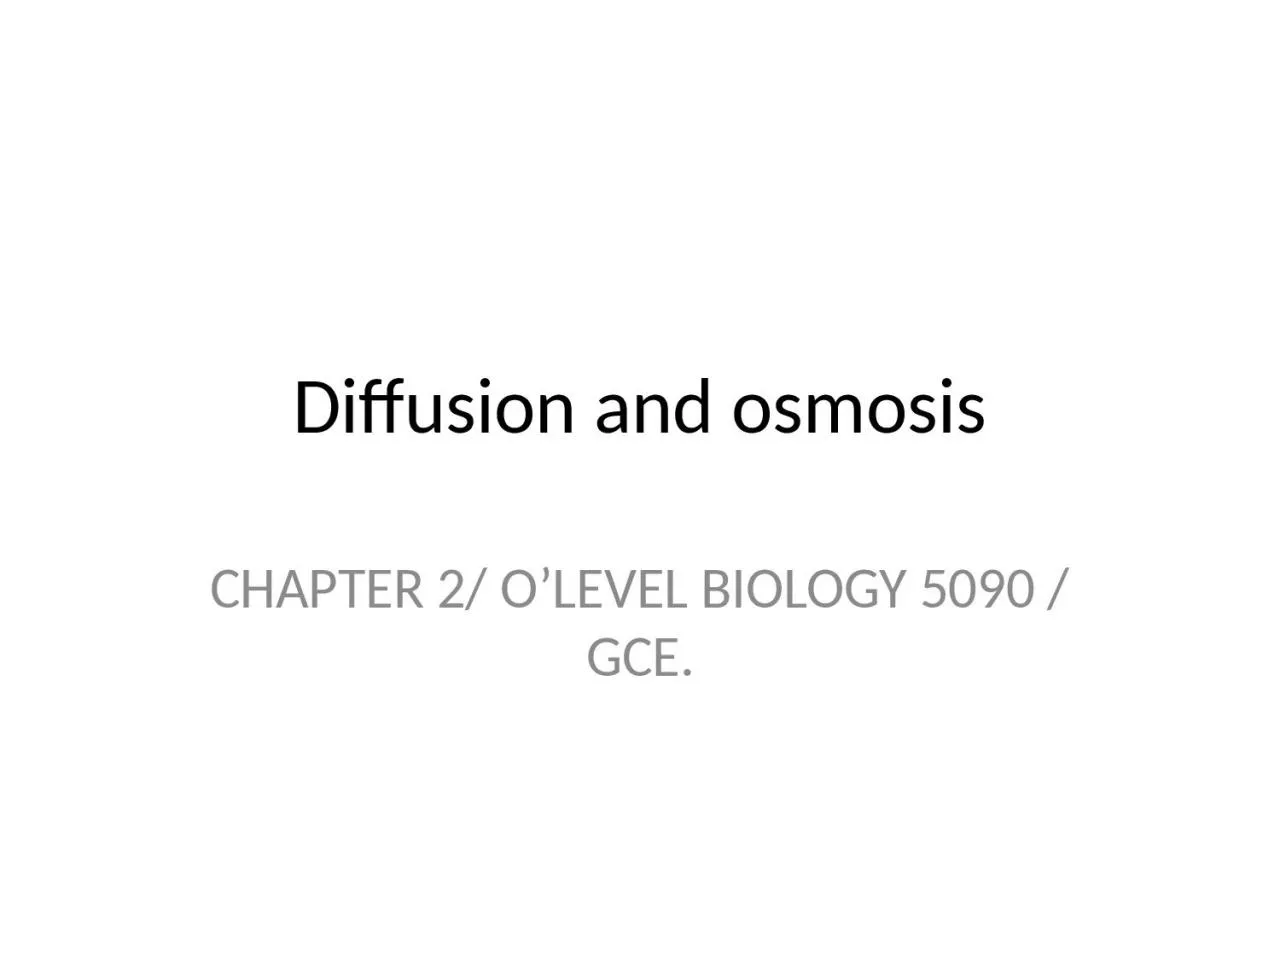 Diffusion and osmosis CHAPTER 2/ O’LEVEL BIOLOGY 5090 / GCE.